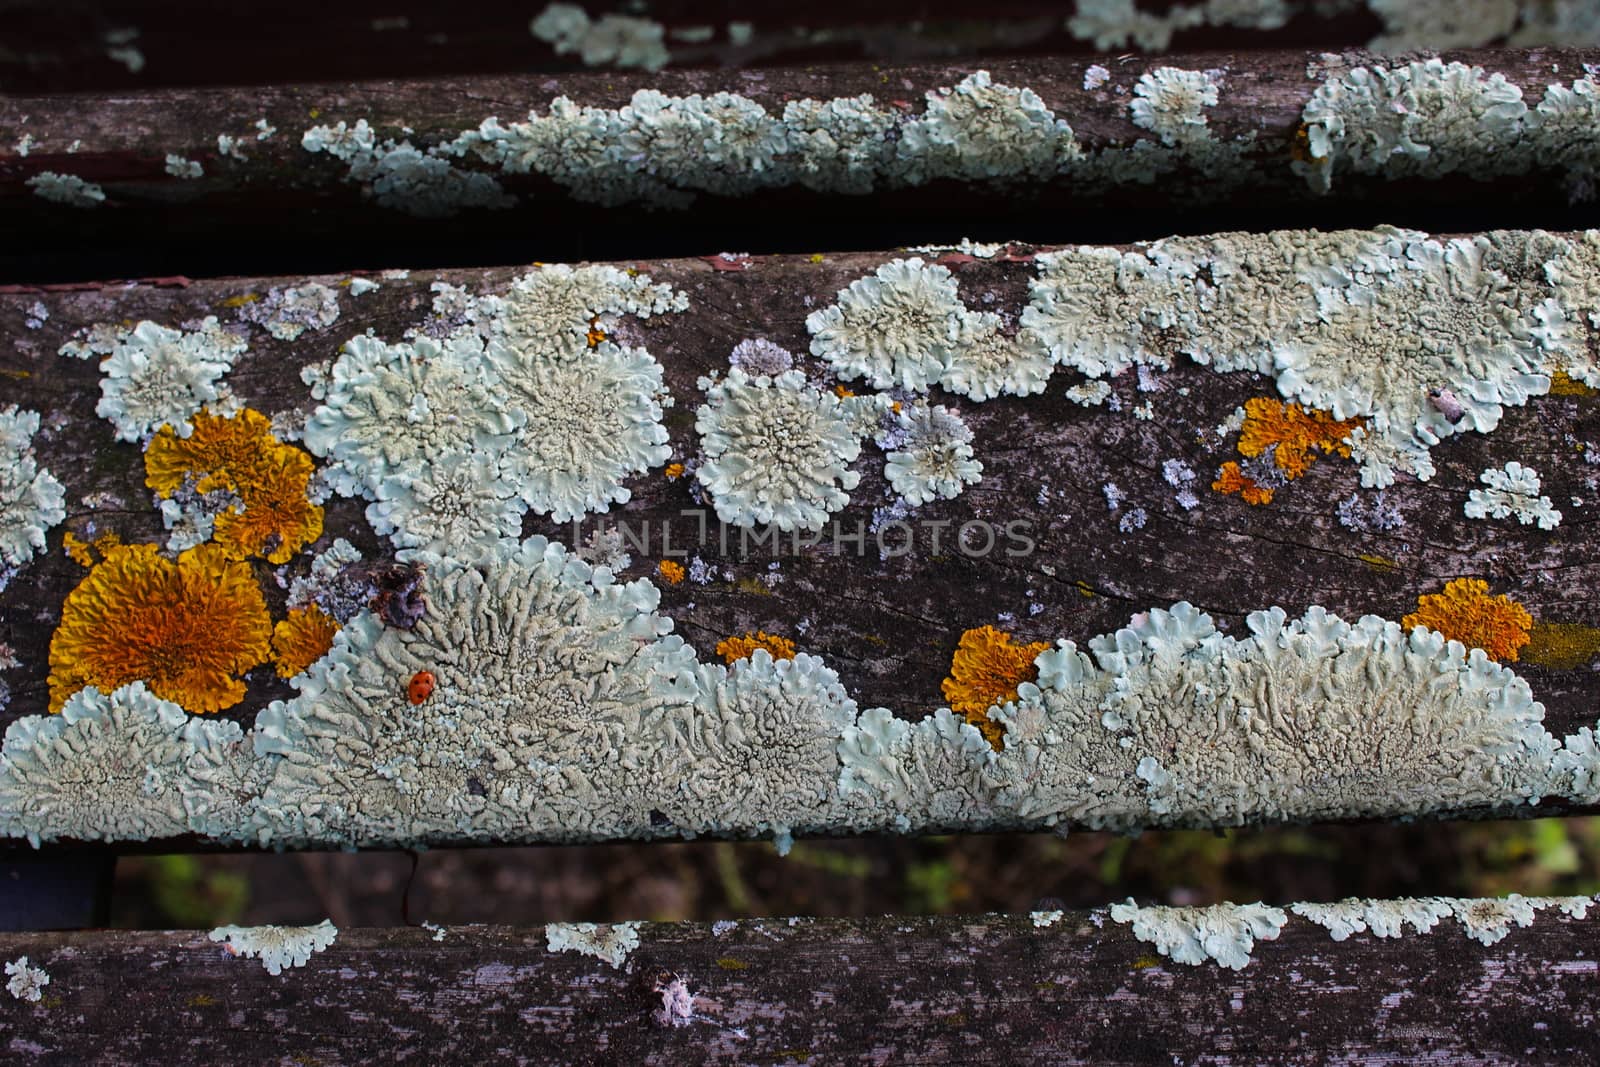 Fungus on the wooden bench. Beja, Portugal.